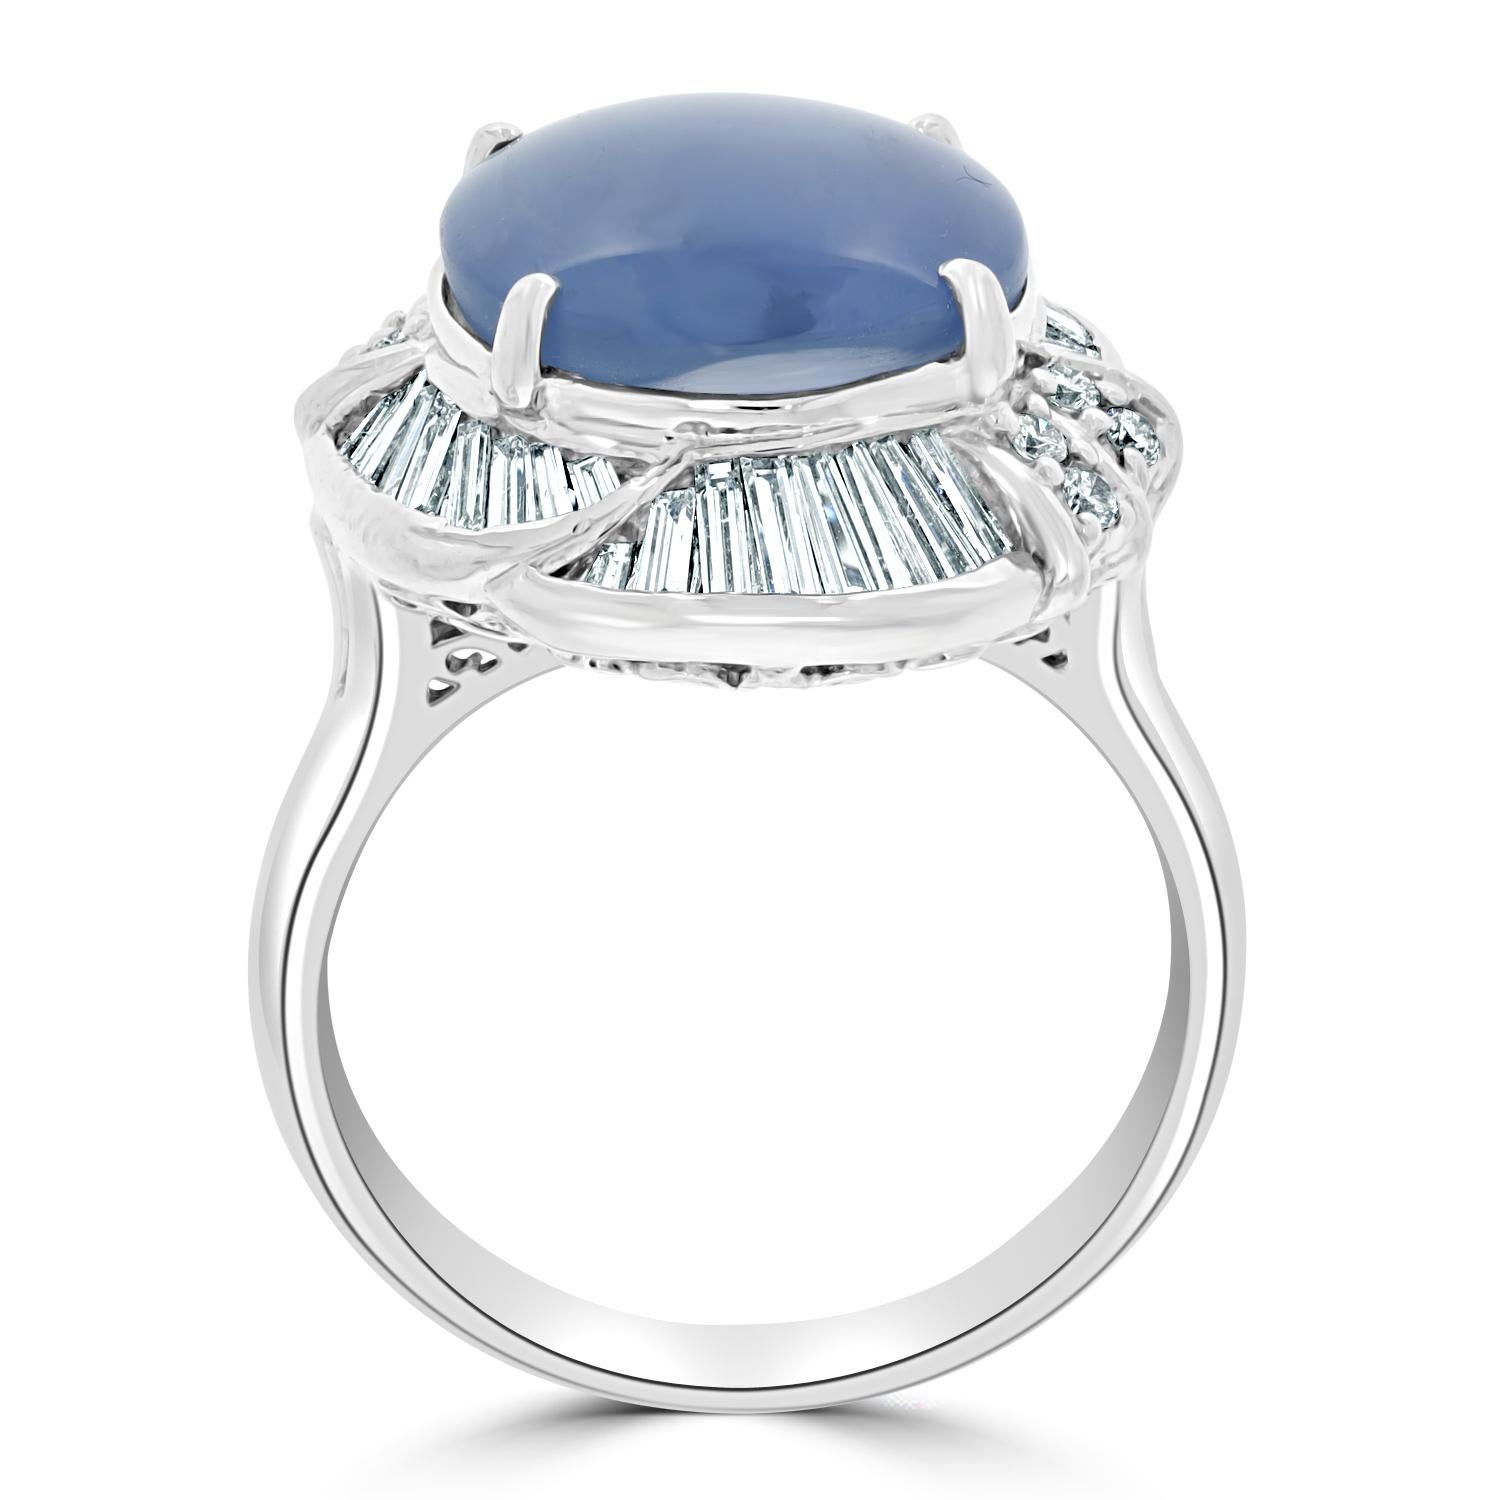 Set with a beautiful round cut Star Sapphire at the center, this stunning ring is crafted from platinum and Diamonds.